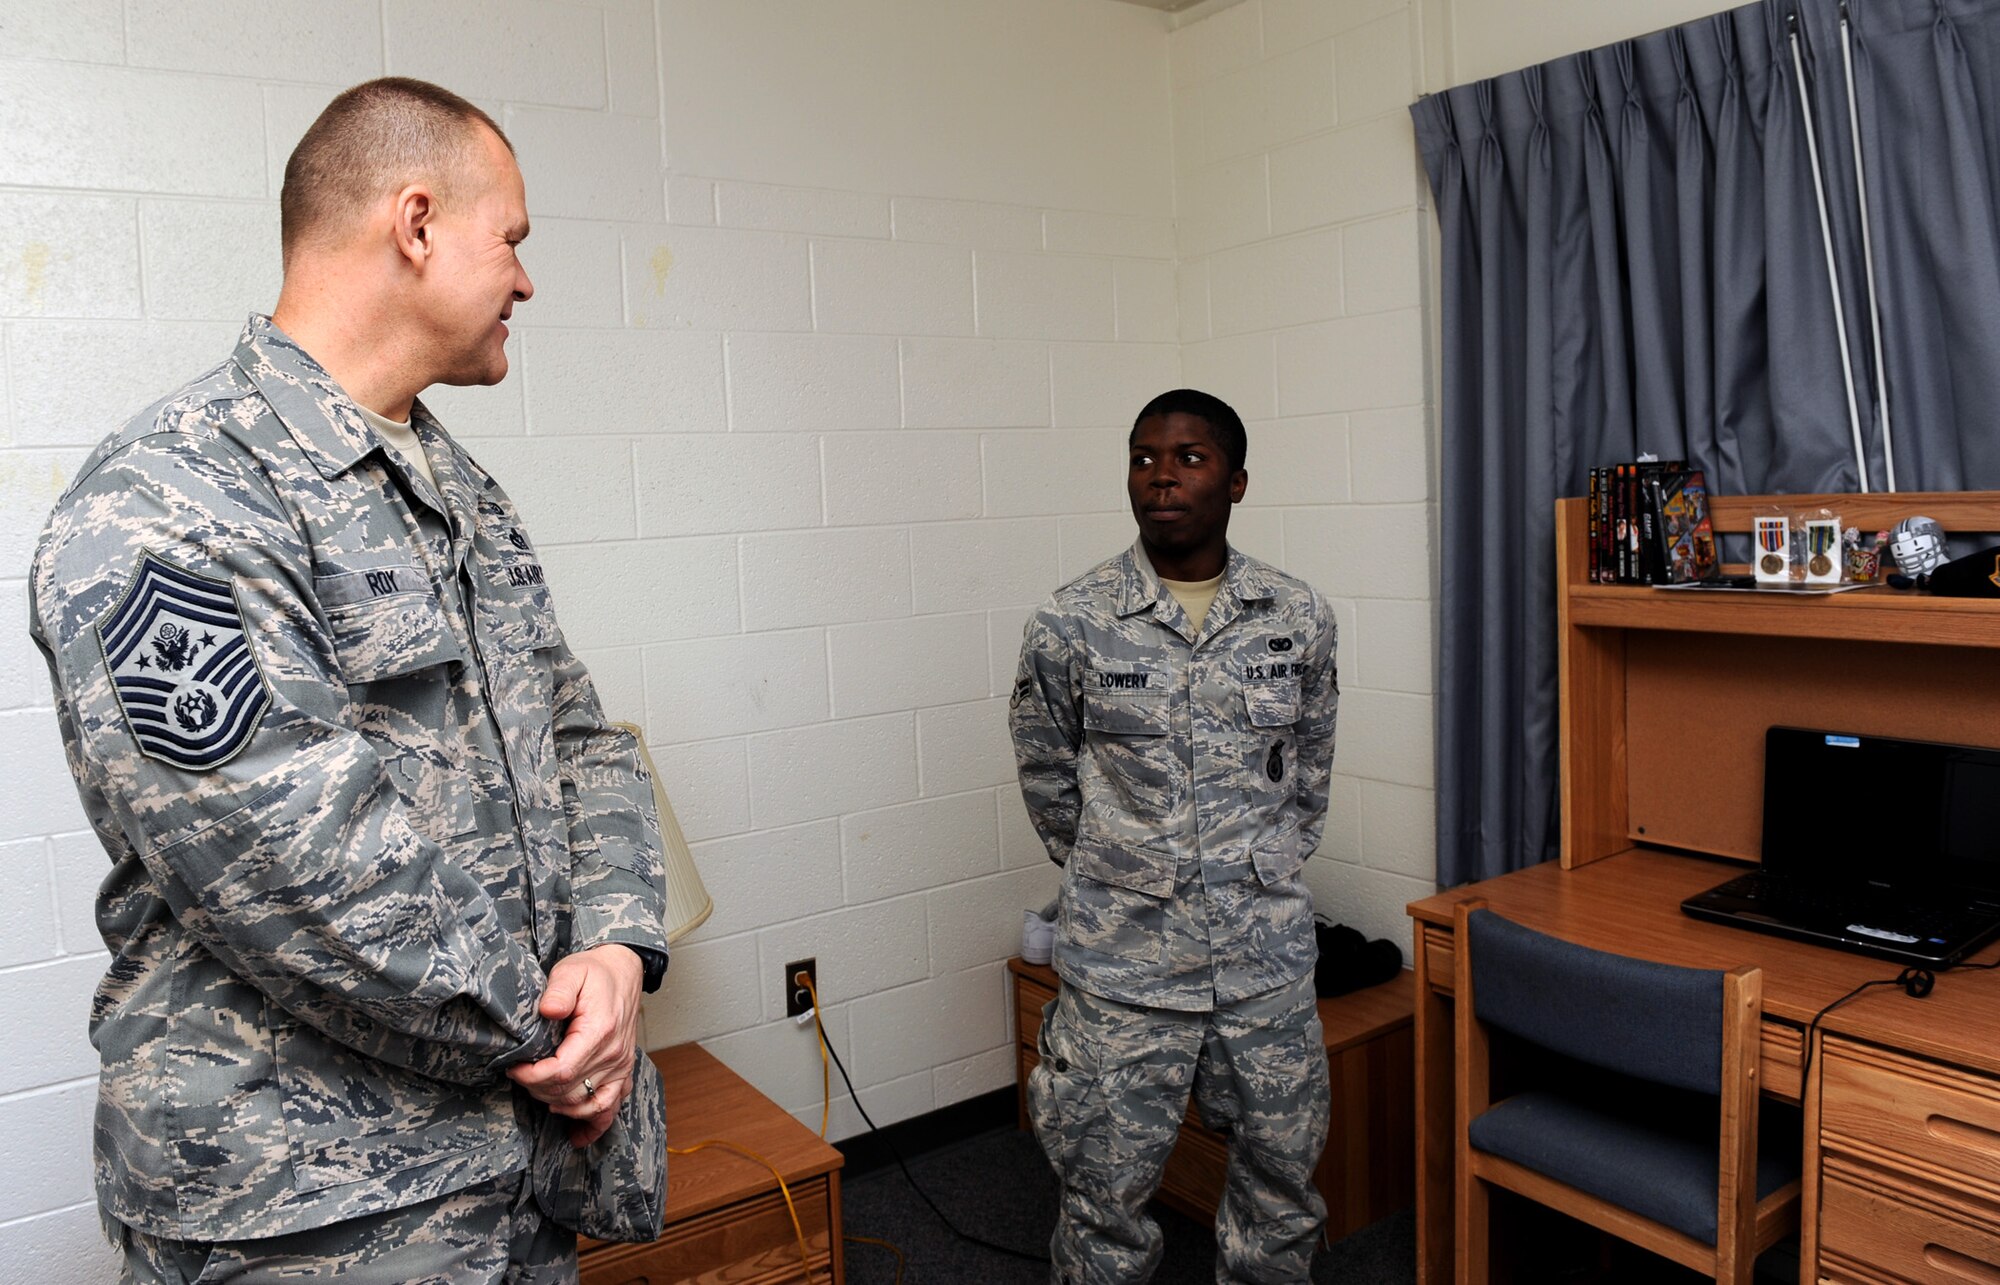 NELLIS AIR FORCE BASE, Nev. -- Chief Master Sgt. of the Air Force James A. Roy conducts a dorm inspection at Airman 1st Class Ryan Lowery's dorm, Feb. 3. (U.S. Air Force photo by Airman 1st Class Brett Clashman/RELEASED)






















  












 











































  












 
























